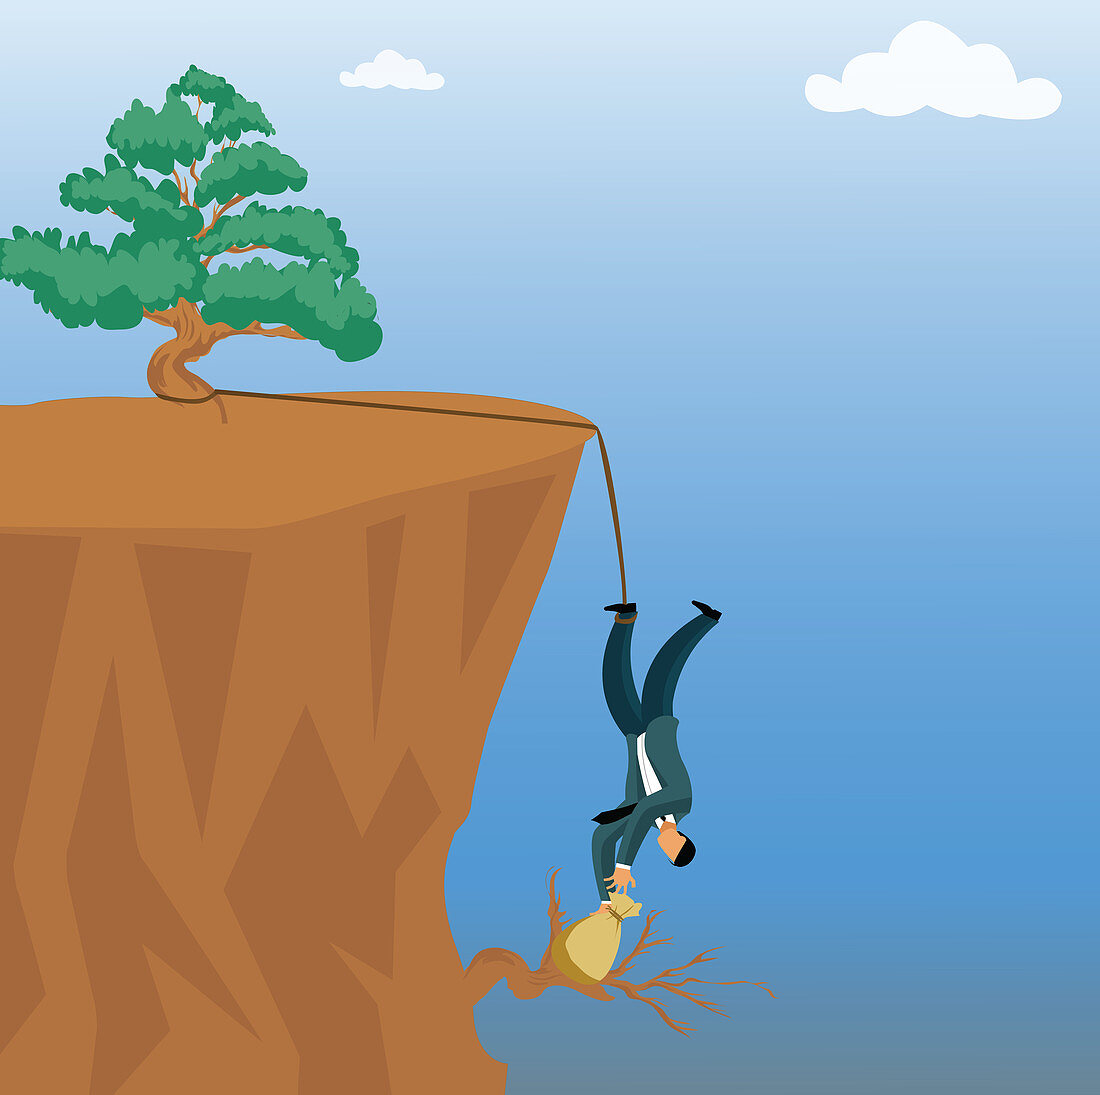 Businessman grabbing a money bag from a cliff, illustration